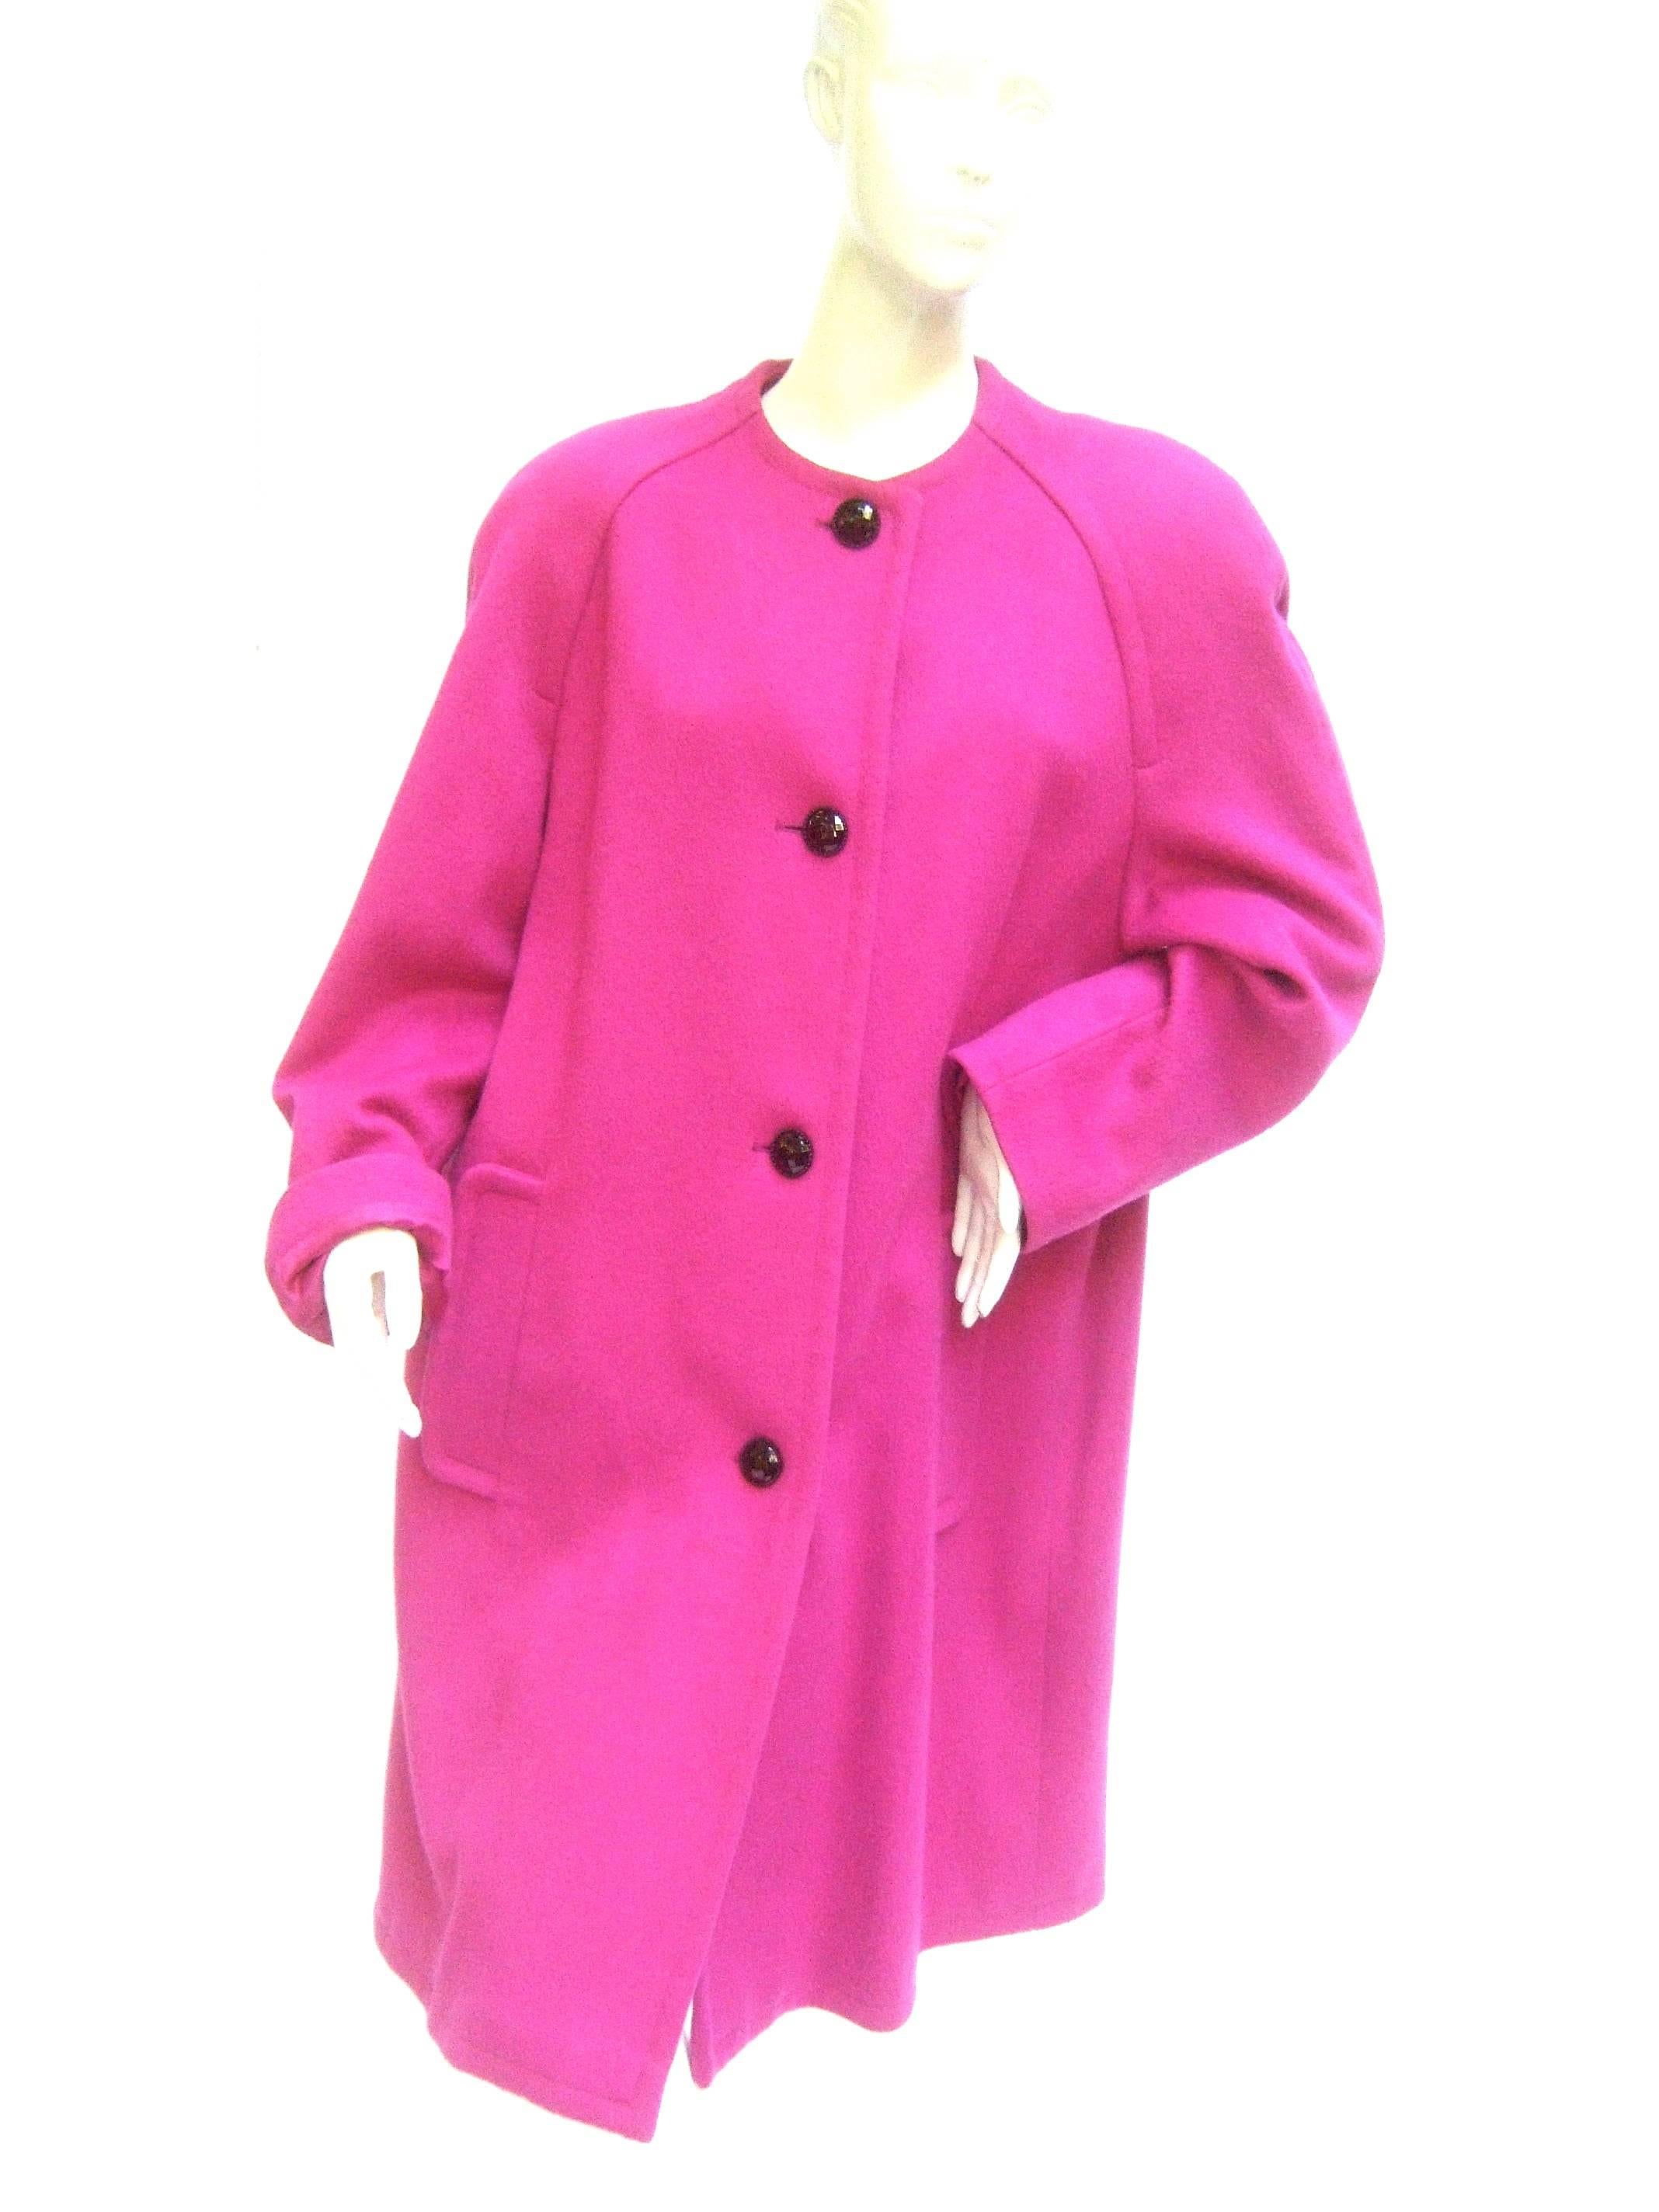 Bill Blass fuchsia wool coat c 1980s
The stylish designer coat makes a striking
bold accessory

Paired with black faceted lucite buttons 
Designed with a pair of pockets on the
front. Lined in fuchsia satin acetate 

The raglan style shoulders have